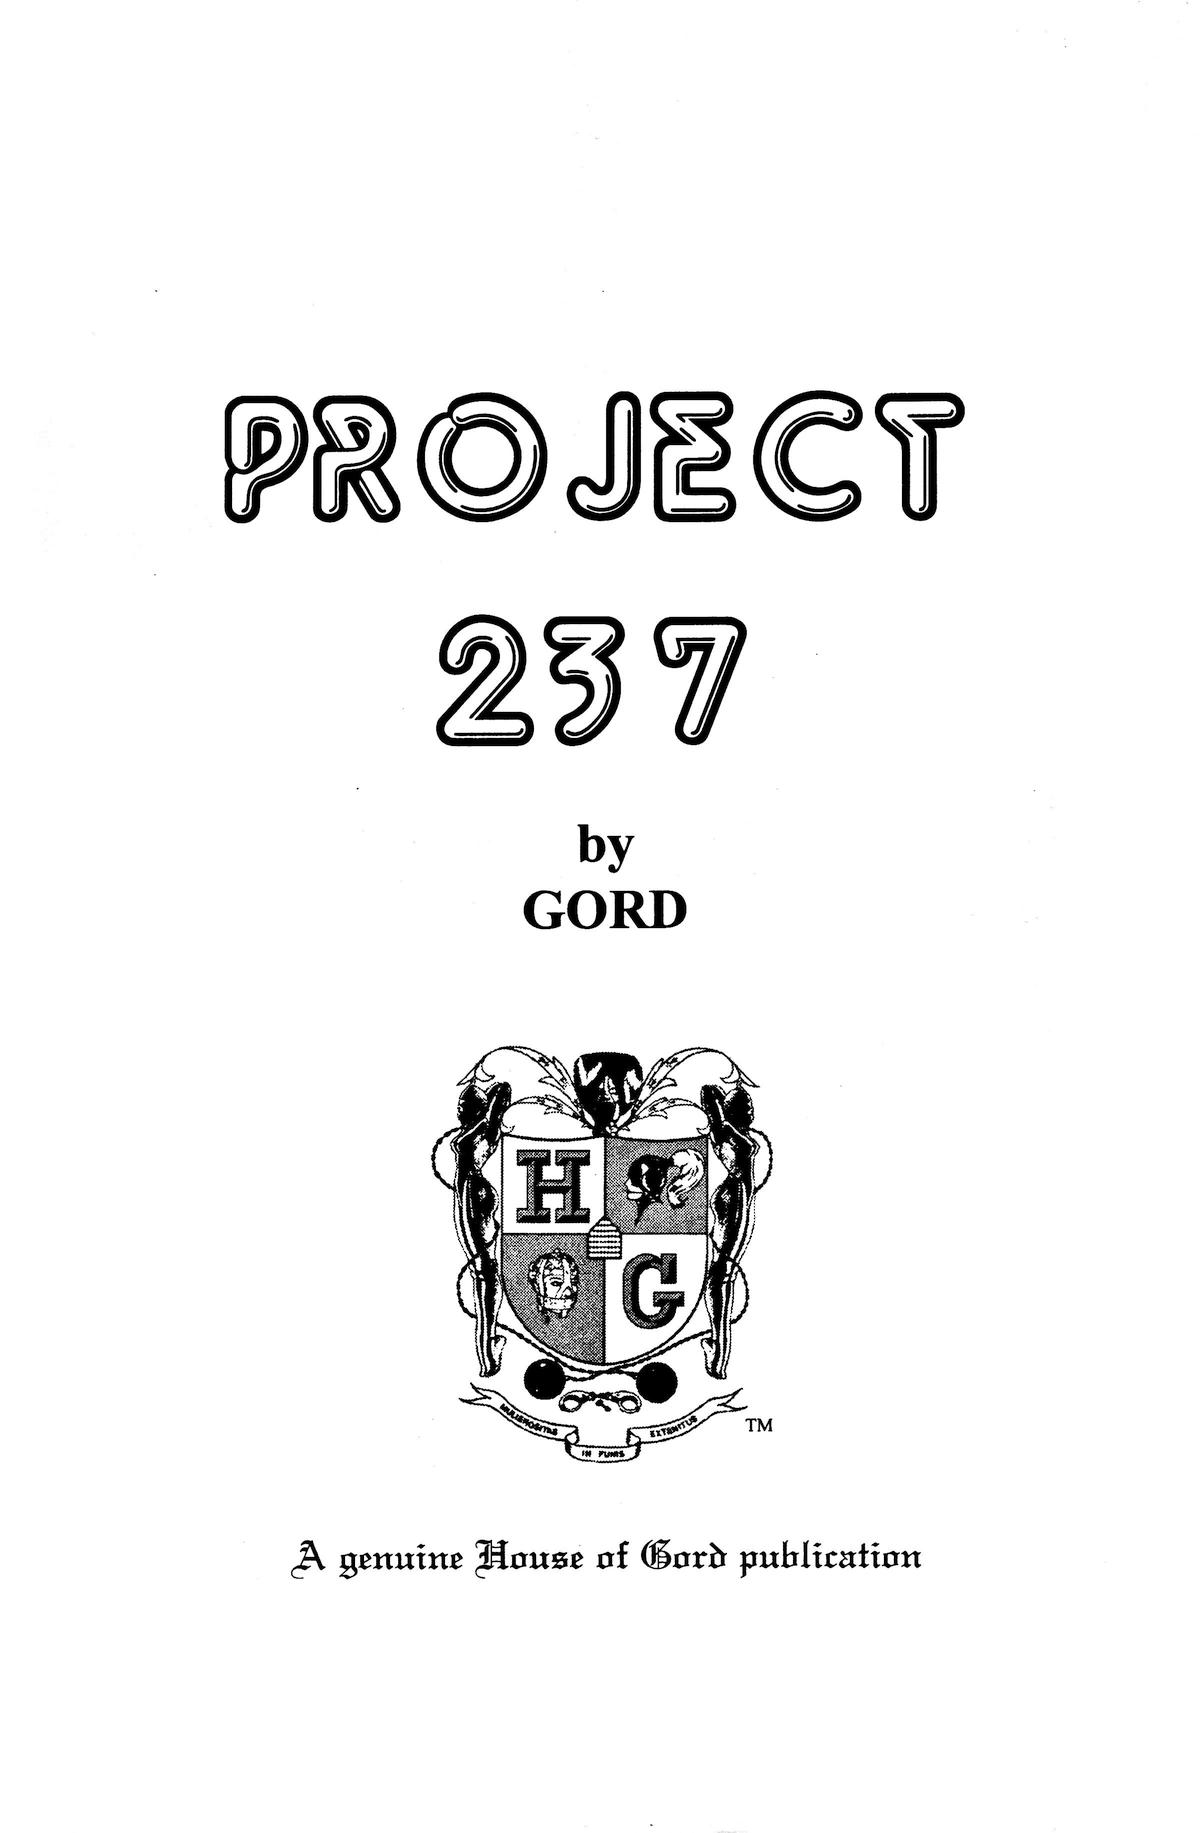 House of Gord BD-027 - Project 237 (with text) [English] 1